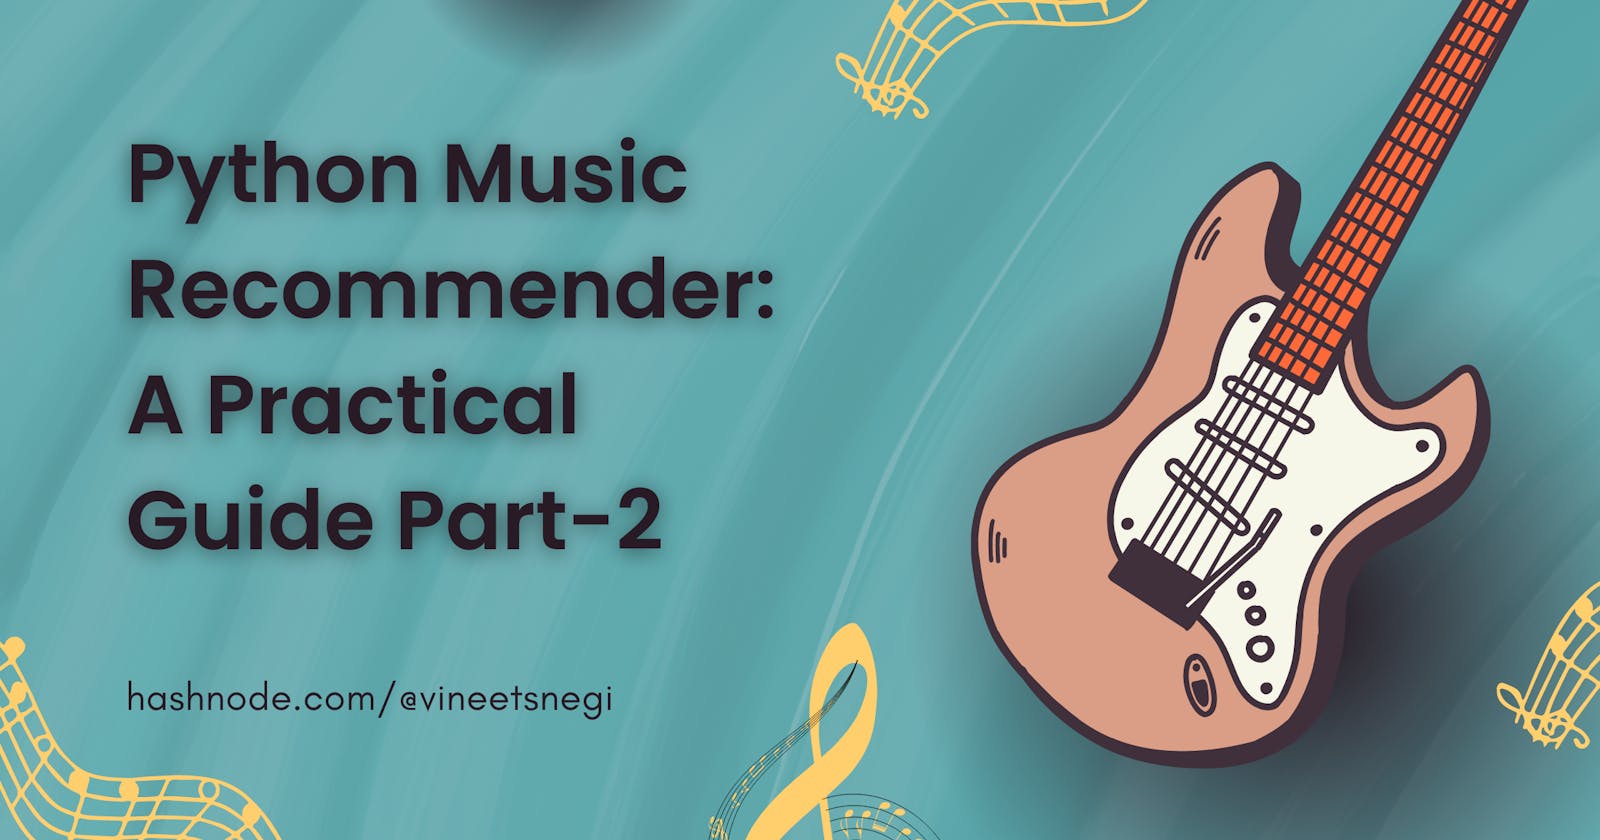 Python Music Recommender: A Practical Guide Part-2